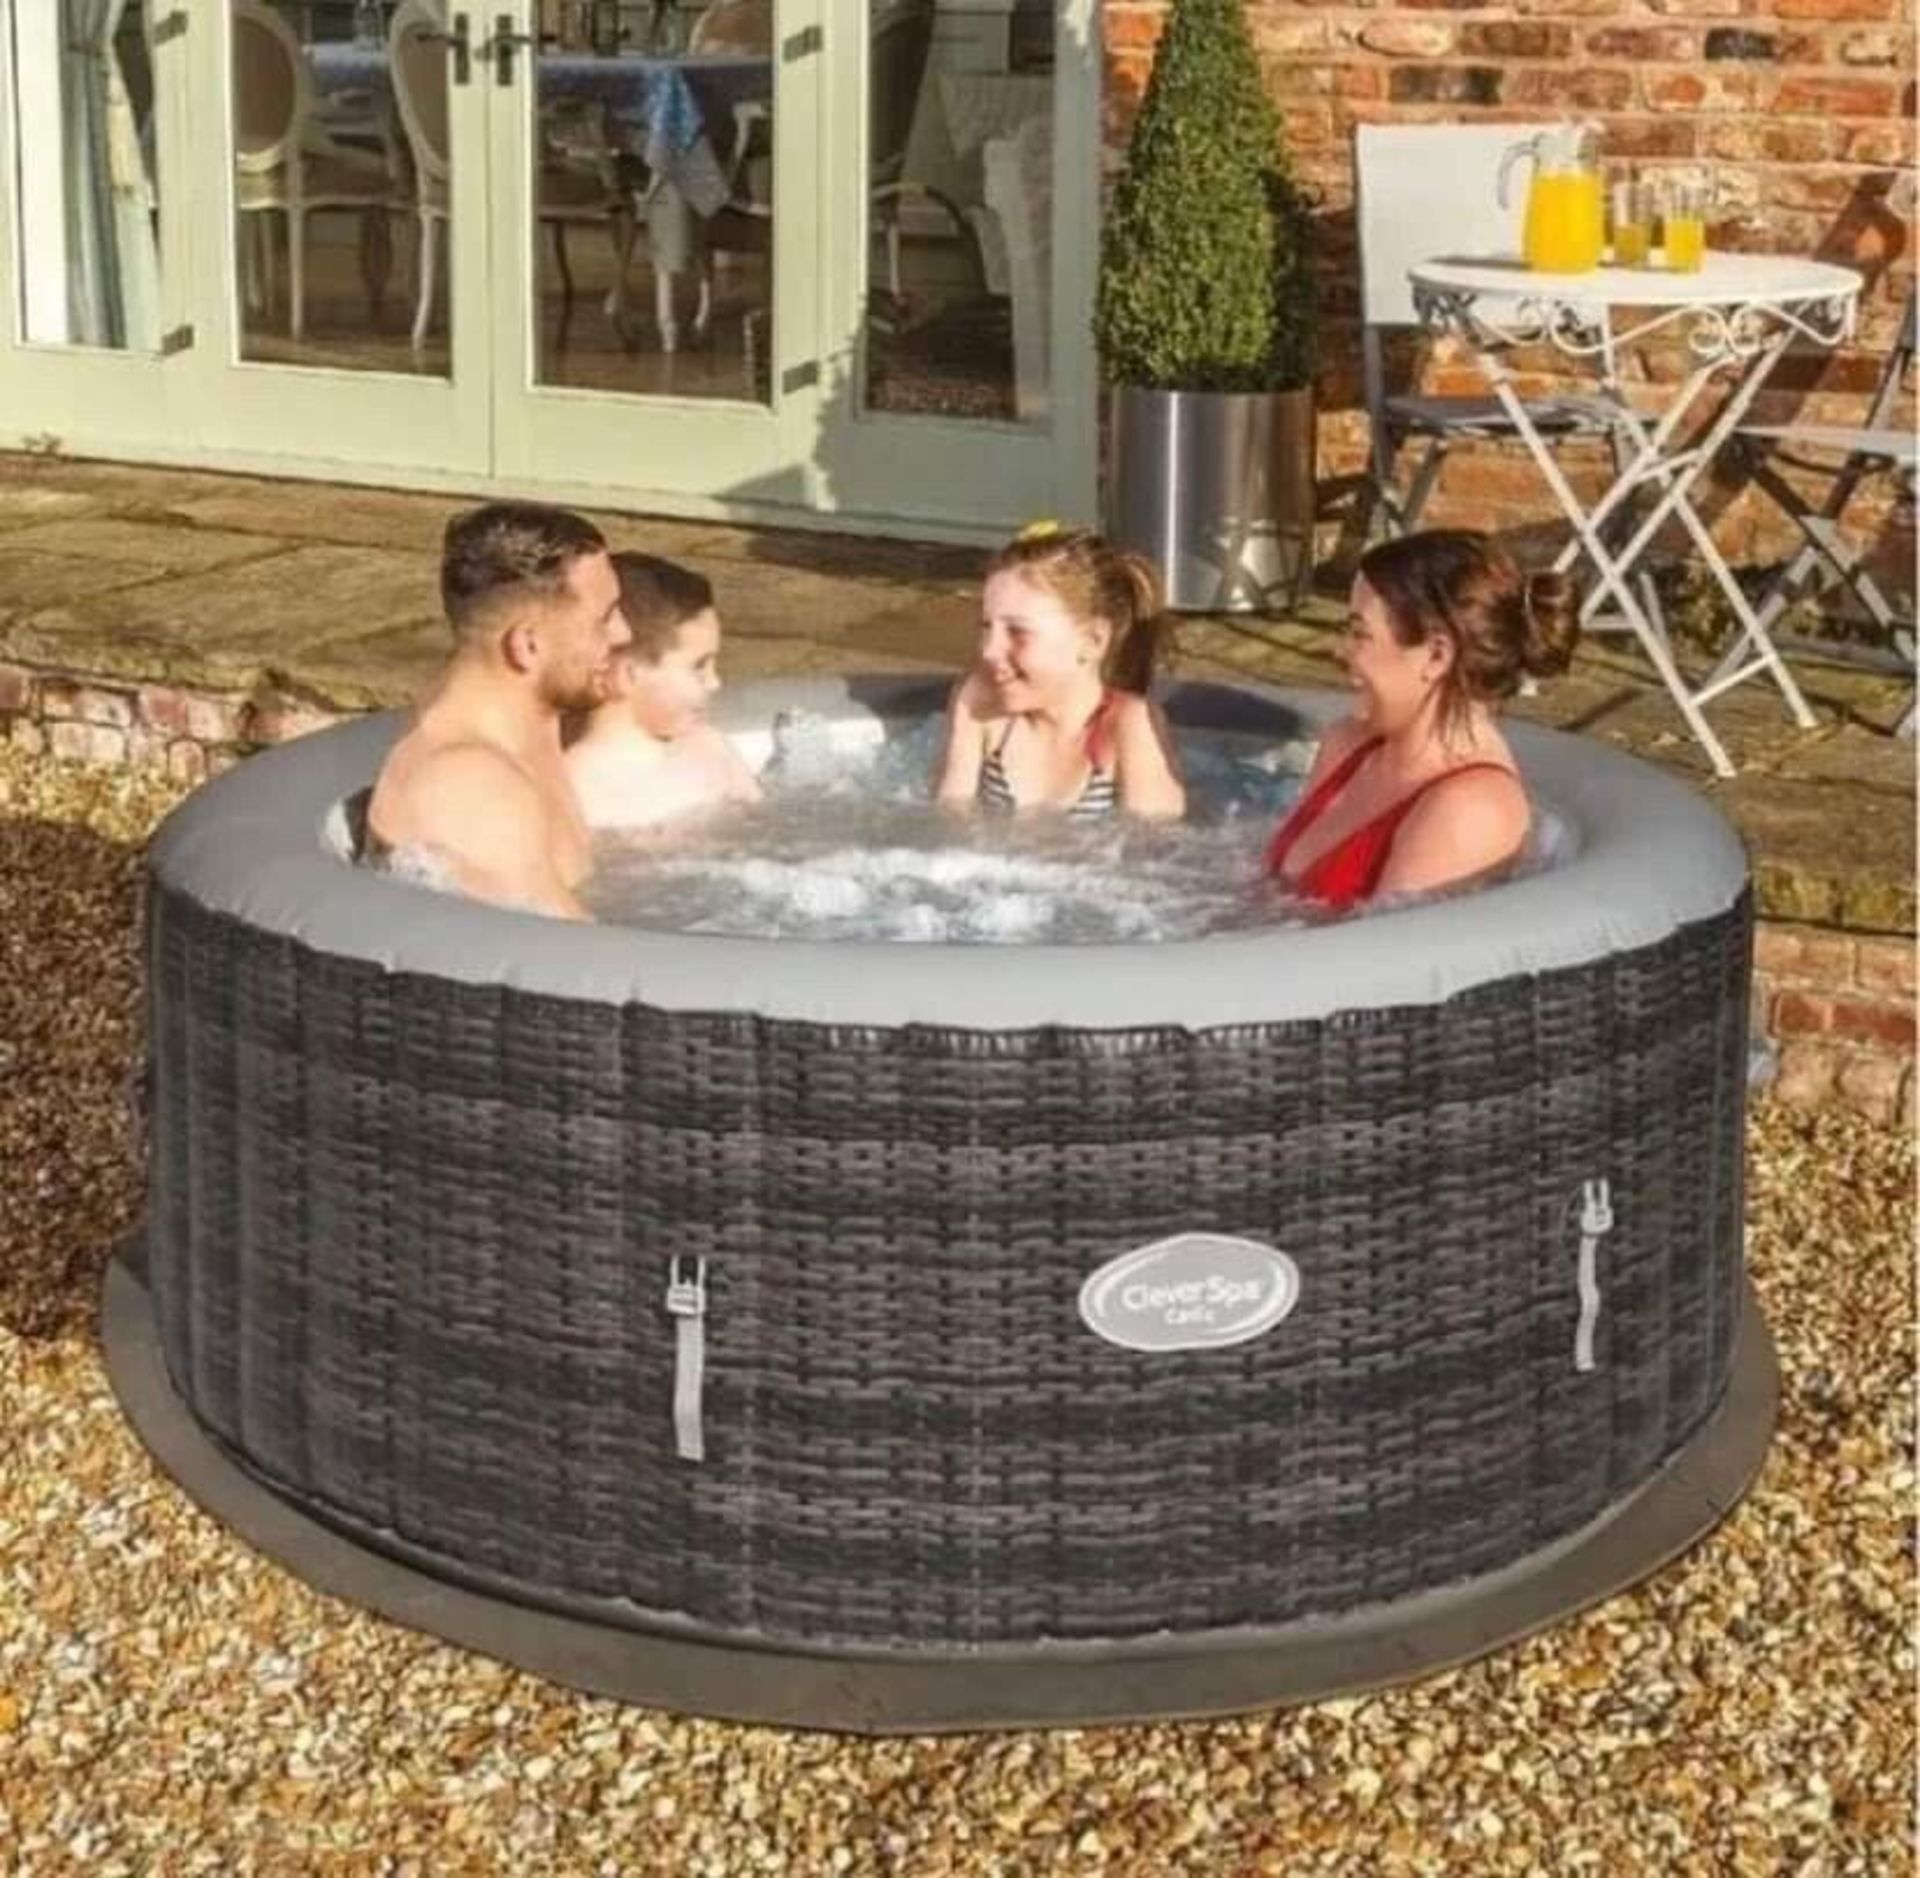 NEW CATIZ 4 PERSON JACUZZI - BUILT IN PUMP AND HEATER - 110 AIR JETS - INFLATES IN 5 MINUTES